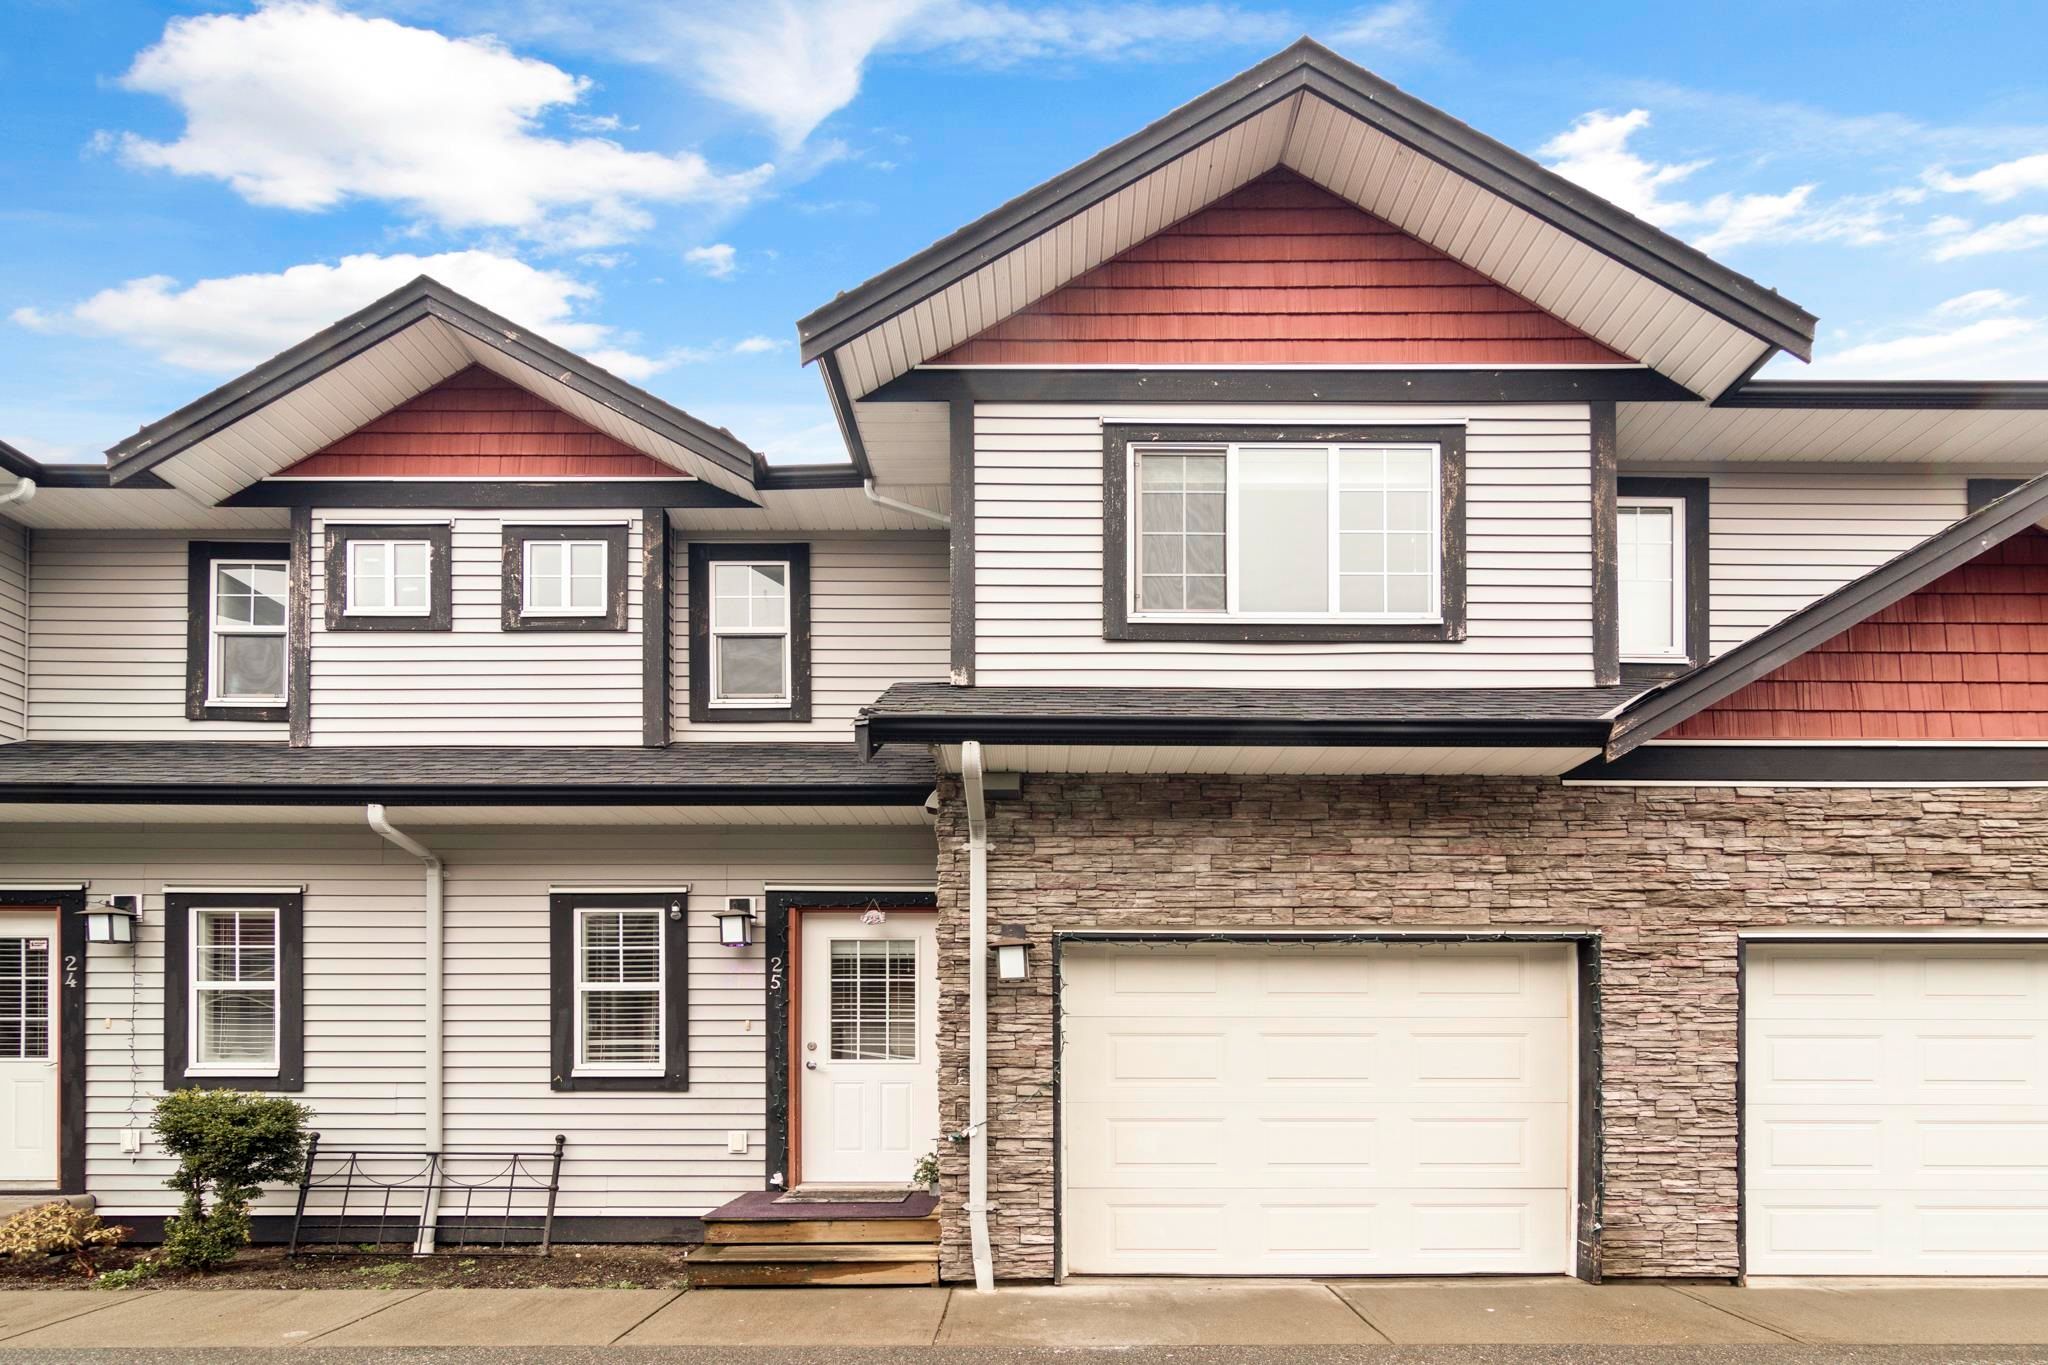 Open House. Open House on Sunday, March 27, 2022 2:00PM - 4:00PM
Come on by and check out this spacious 2000sqft plus townhouse in the most desirable area of Abbotsford